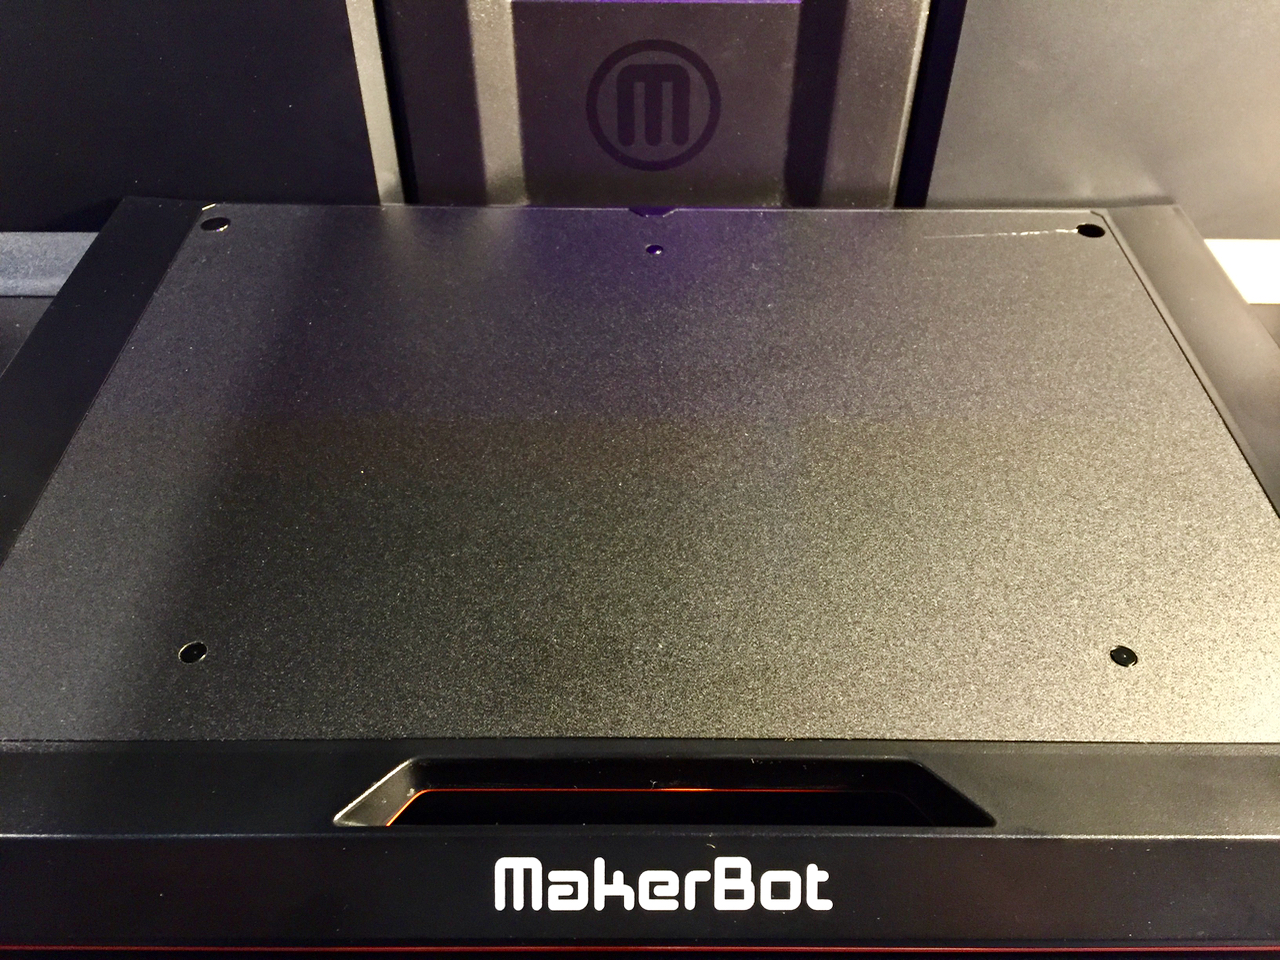  The virgin surface of the new MakerBot Replicator+ print plate 